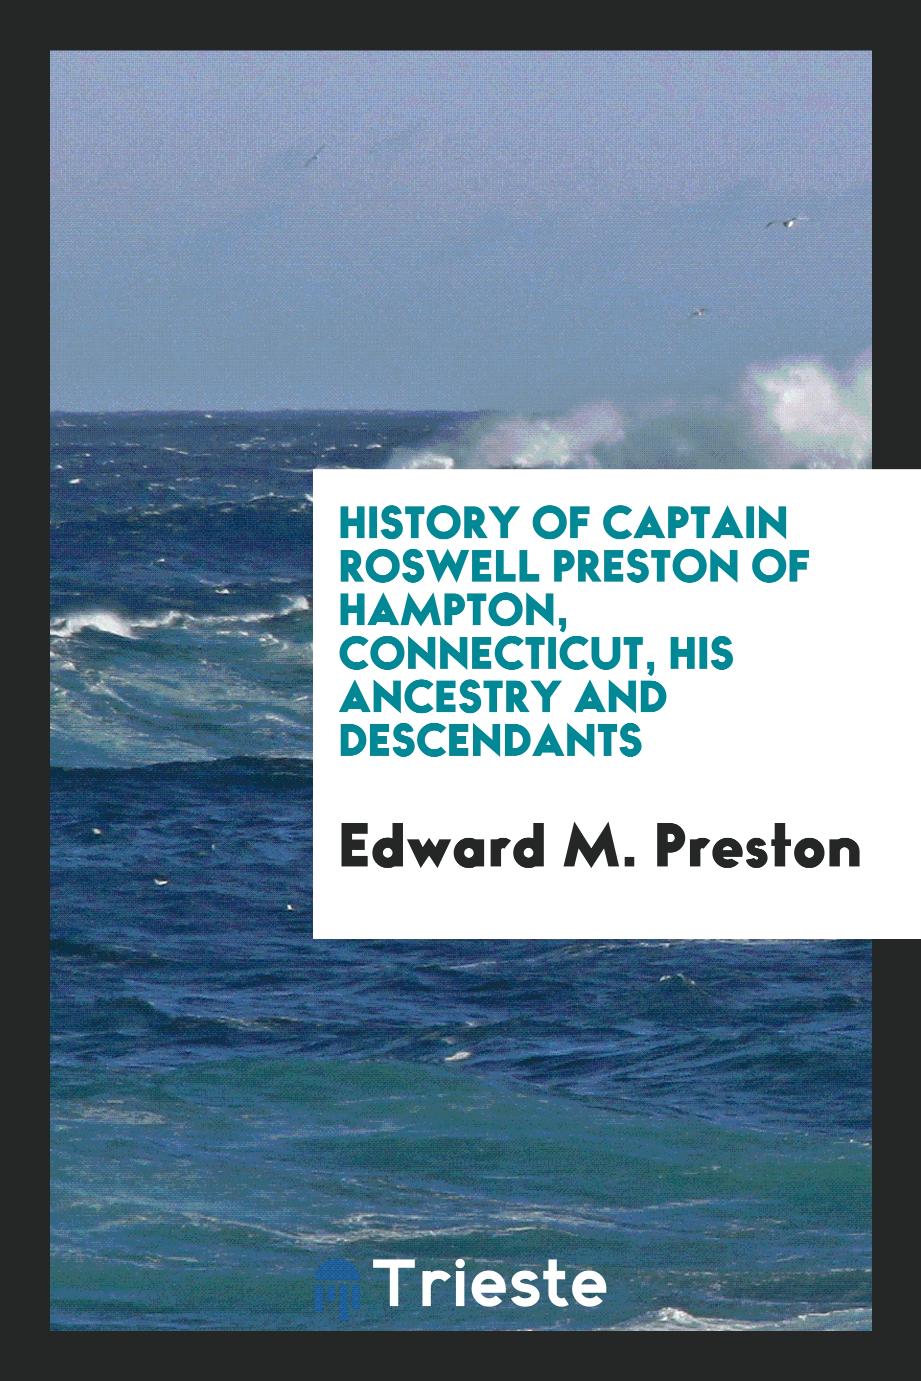 History of Captain Roswell Preston of Hampton, Connecticut, His Ancestry and Descendants